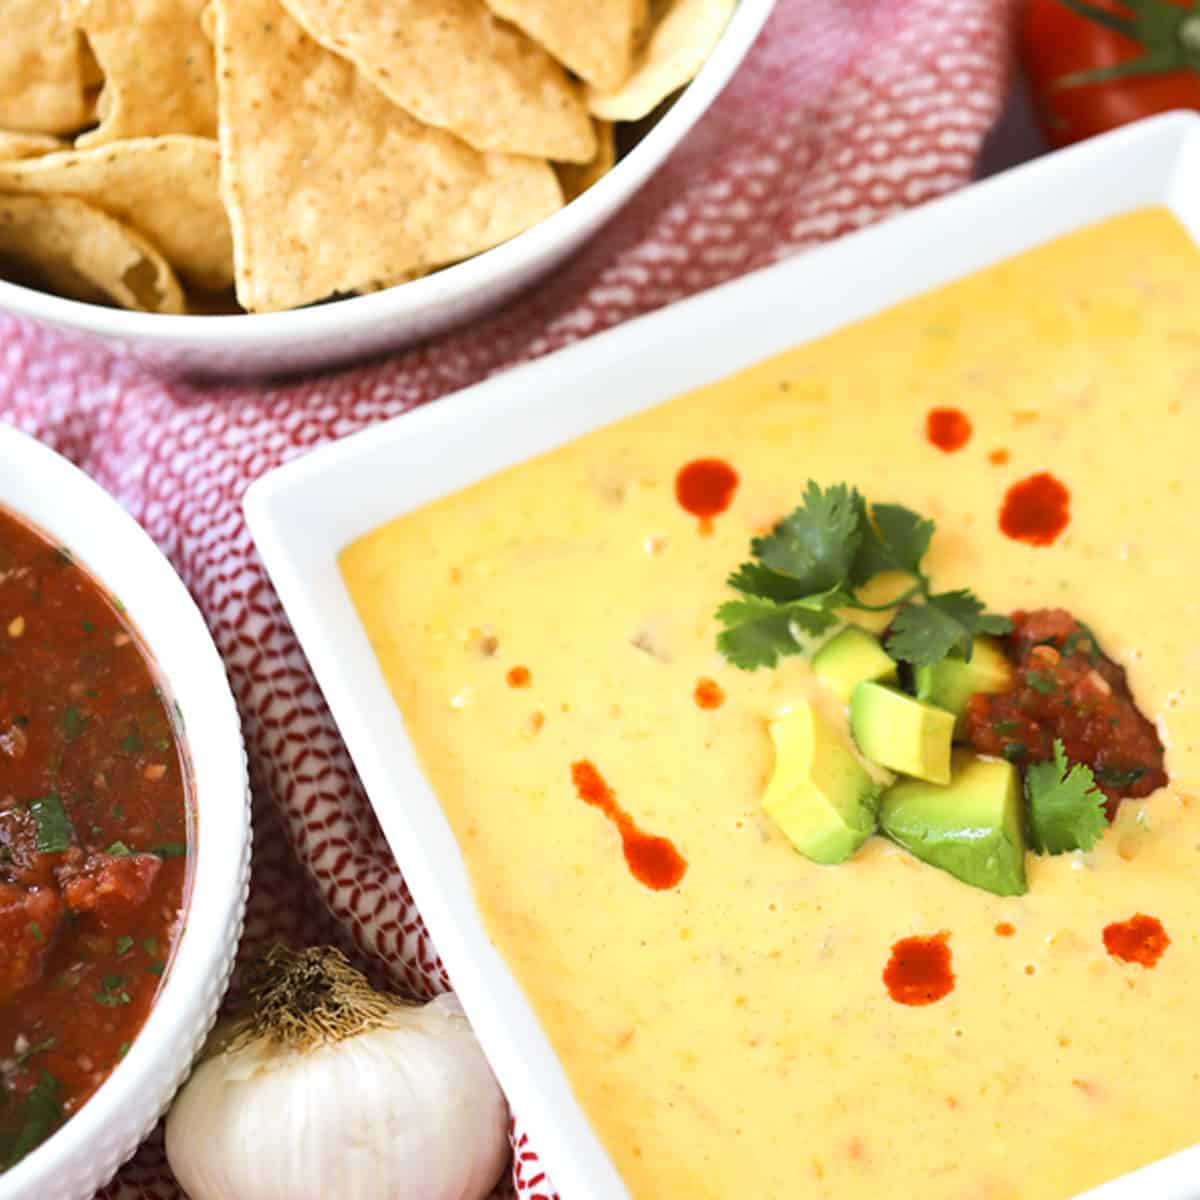 Cheddar Queso Dip with chips on the side and hot sauce with avocado garnish